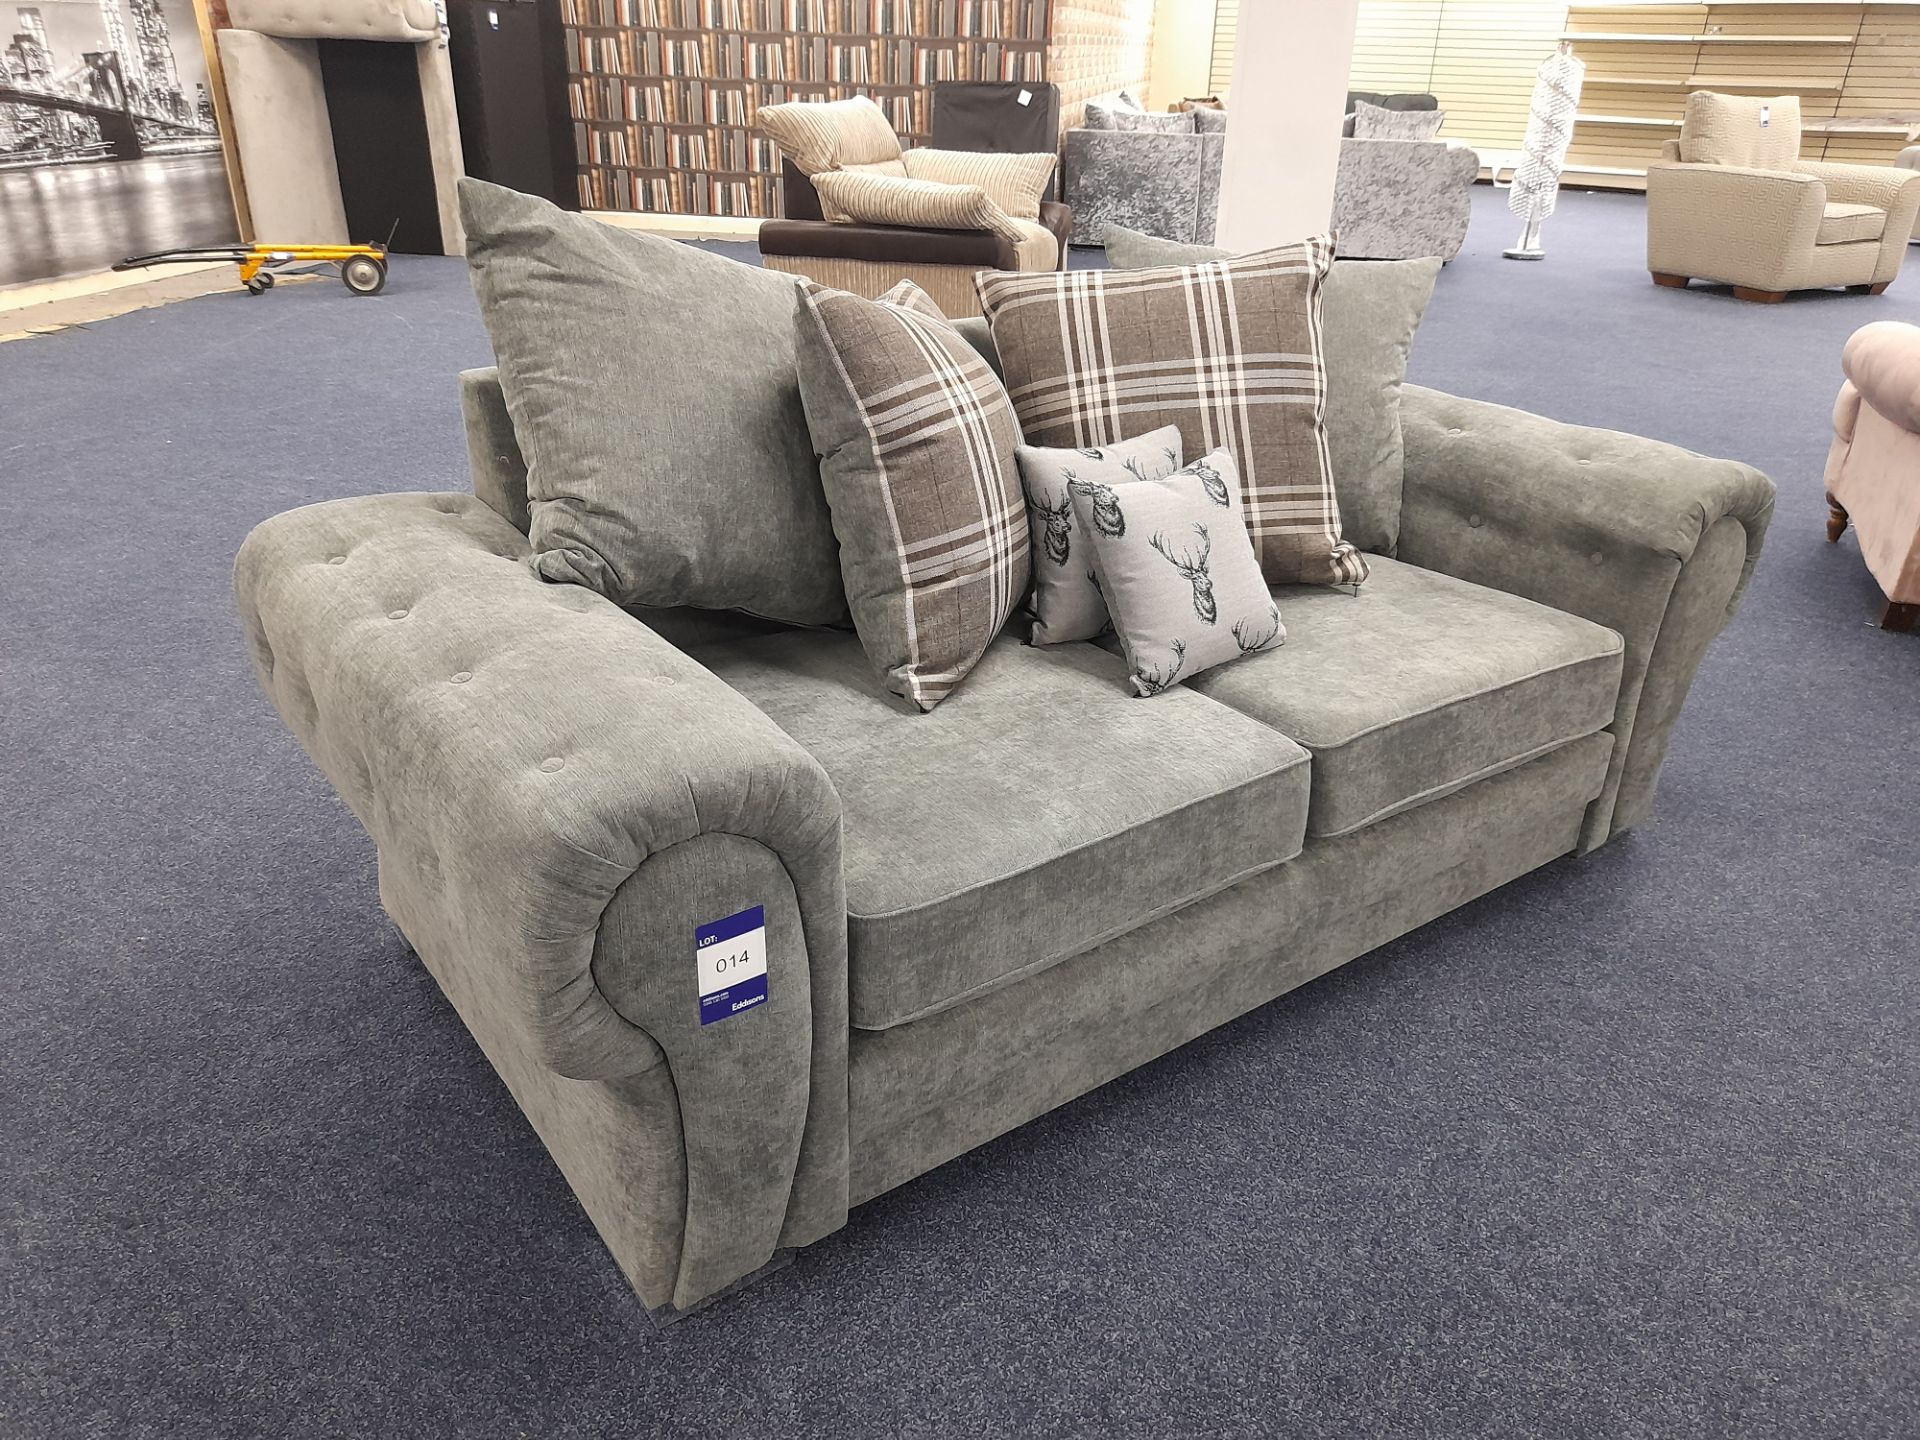 Grey/Blue fabric upholstered, 3 seater, scatter cushioned back sofa (Ex-Display) - Image 5 of 5